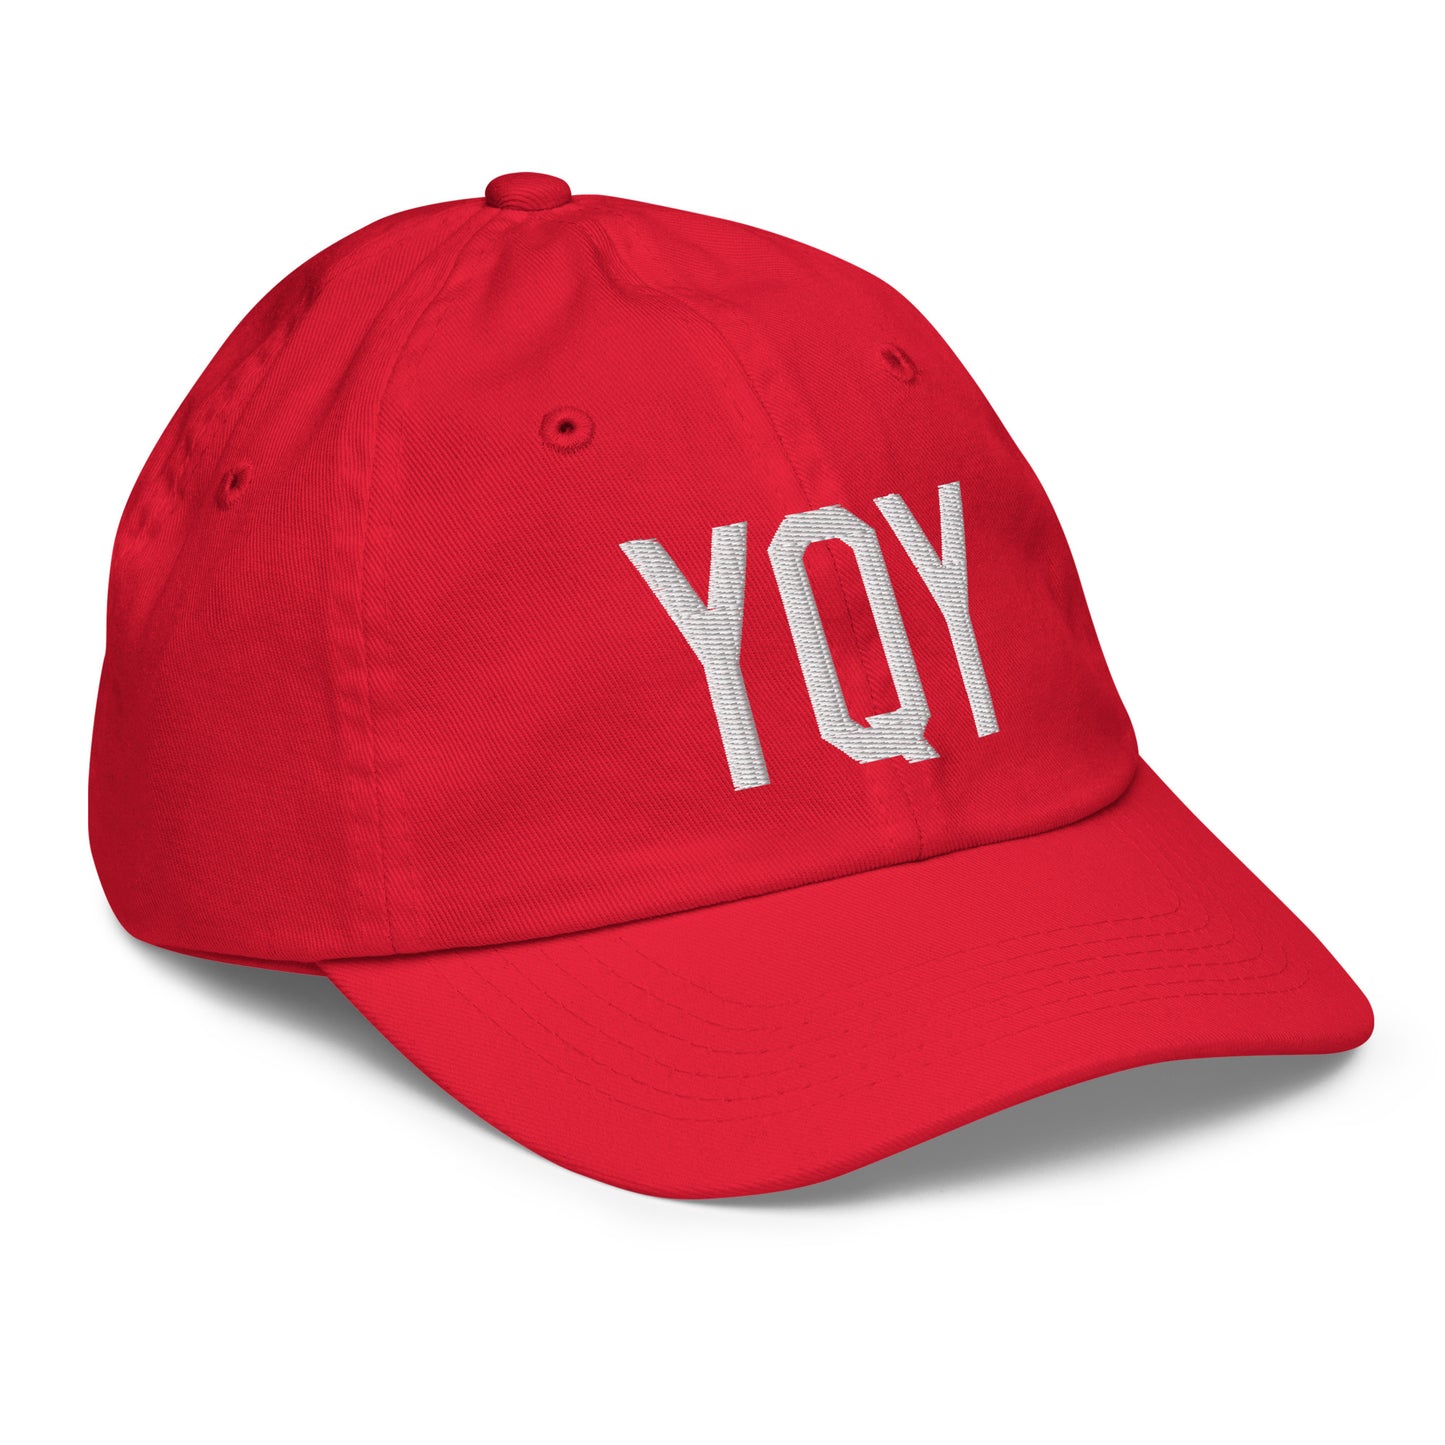 Airport Code Kid's Baseball Cap - White • YQY Sydney • YHM Designs - Image 18